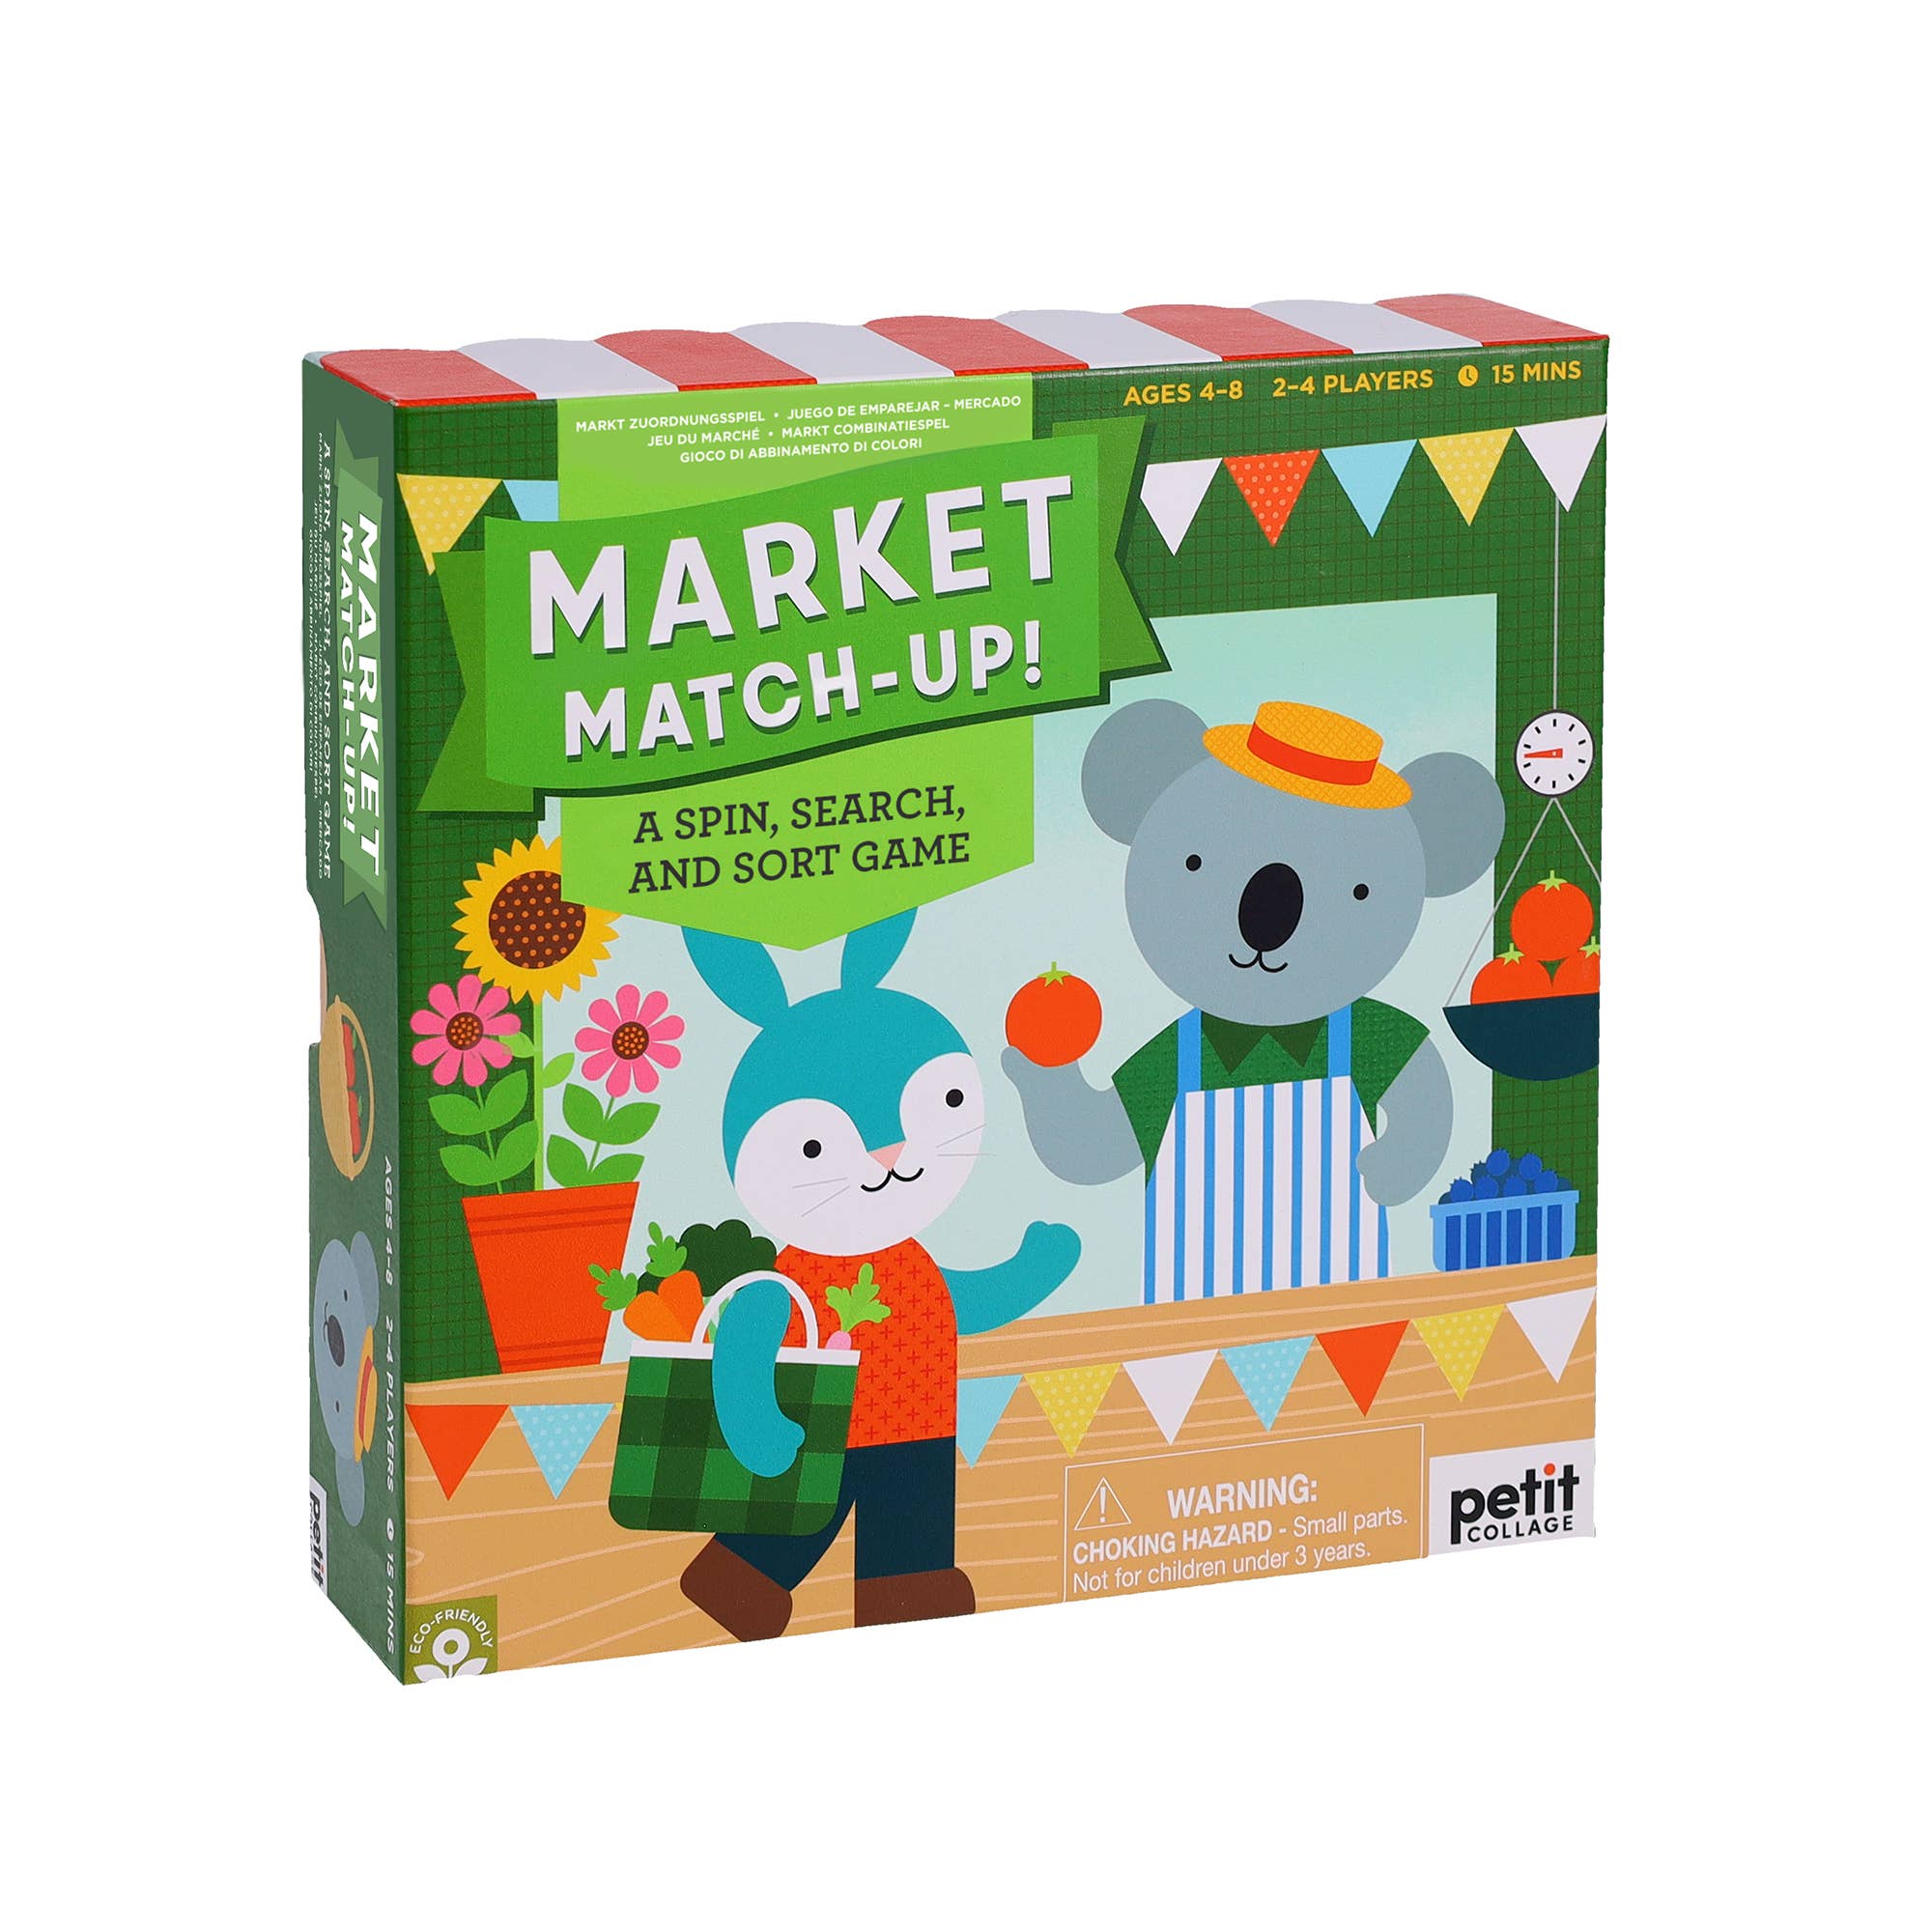 Market Match-Up!: A Spin, Search, and Sort Game